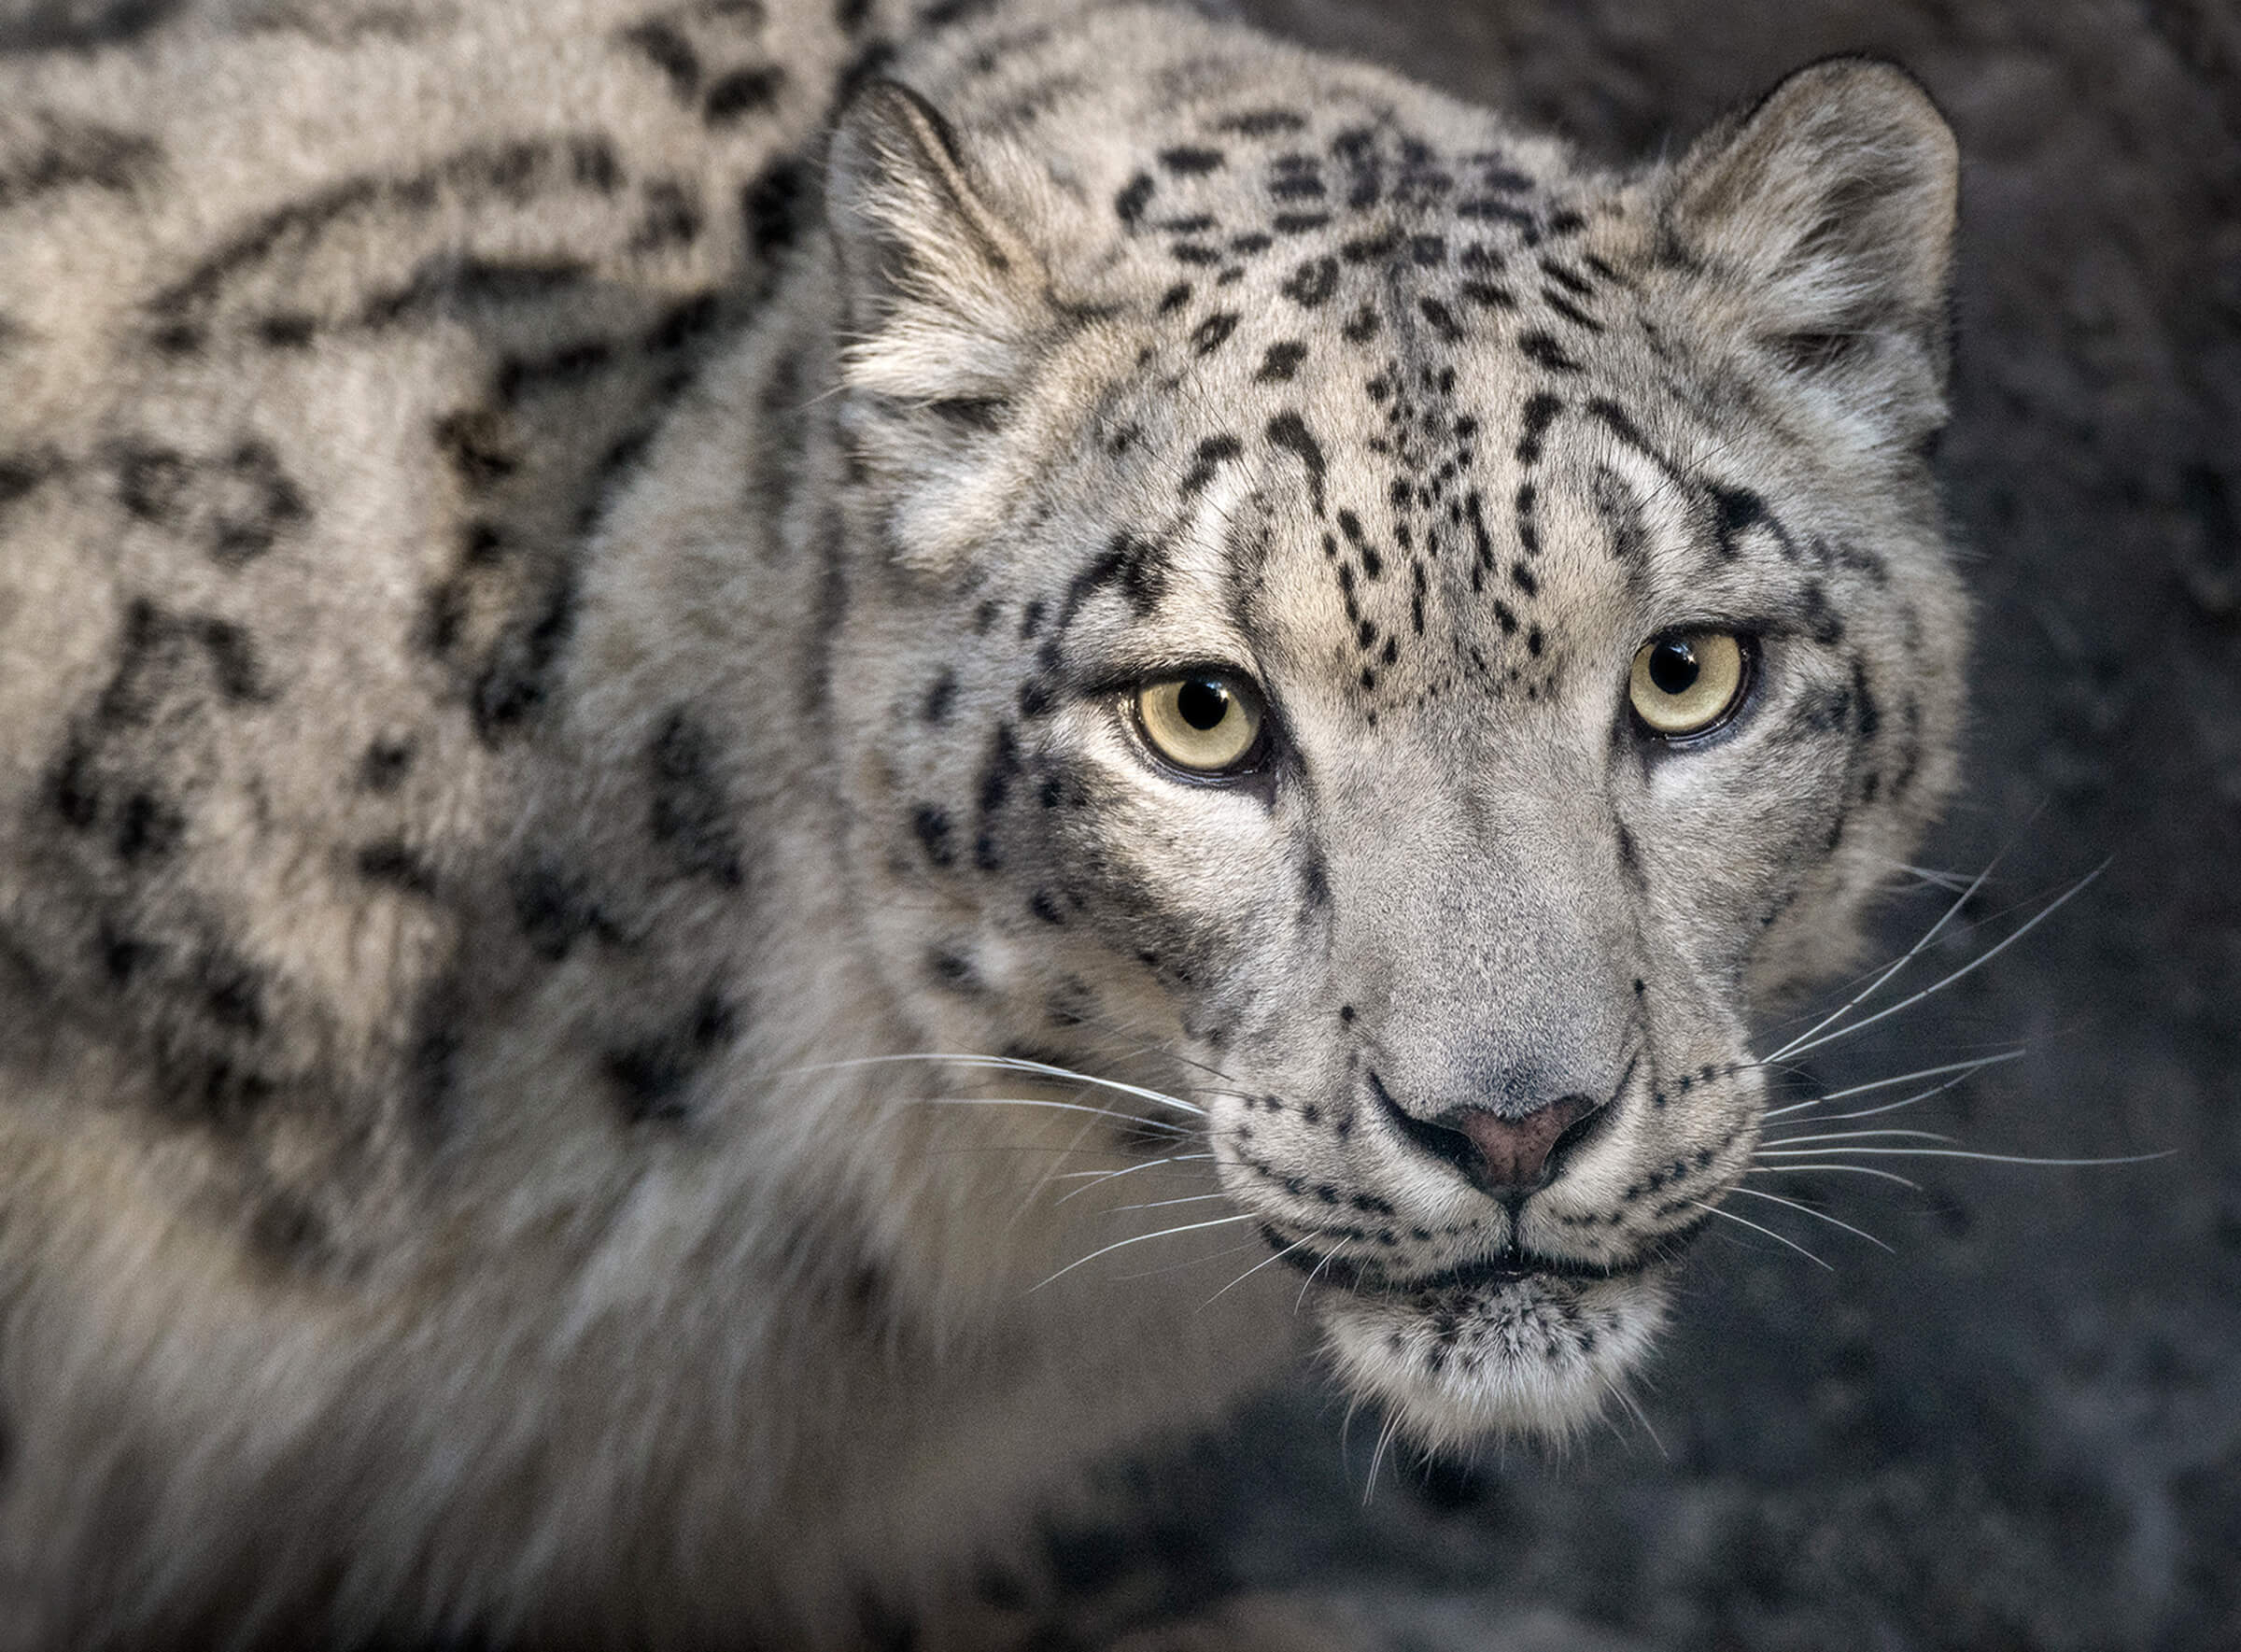 Snow Leopard Magic Moment (16+) – Royal Zoological Society of Scotland